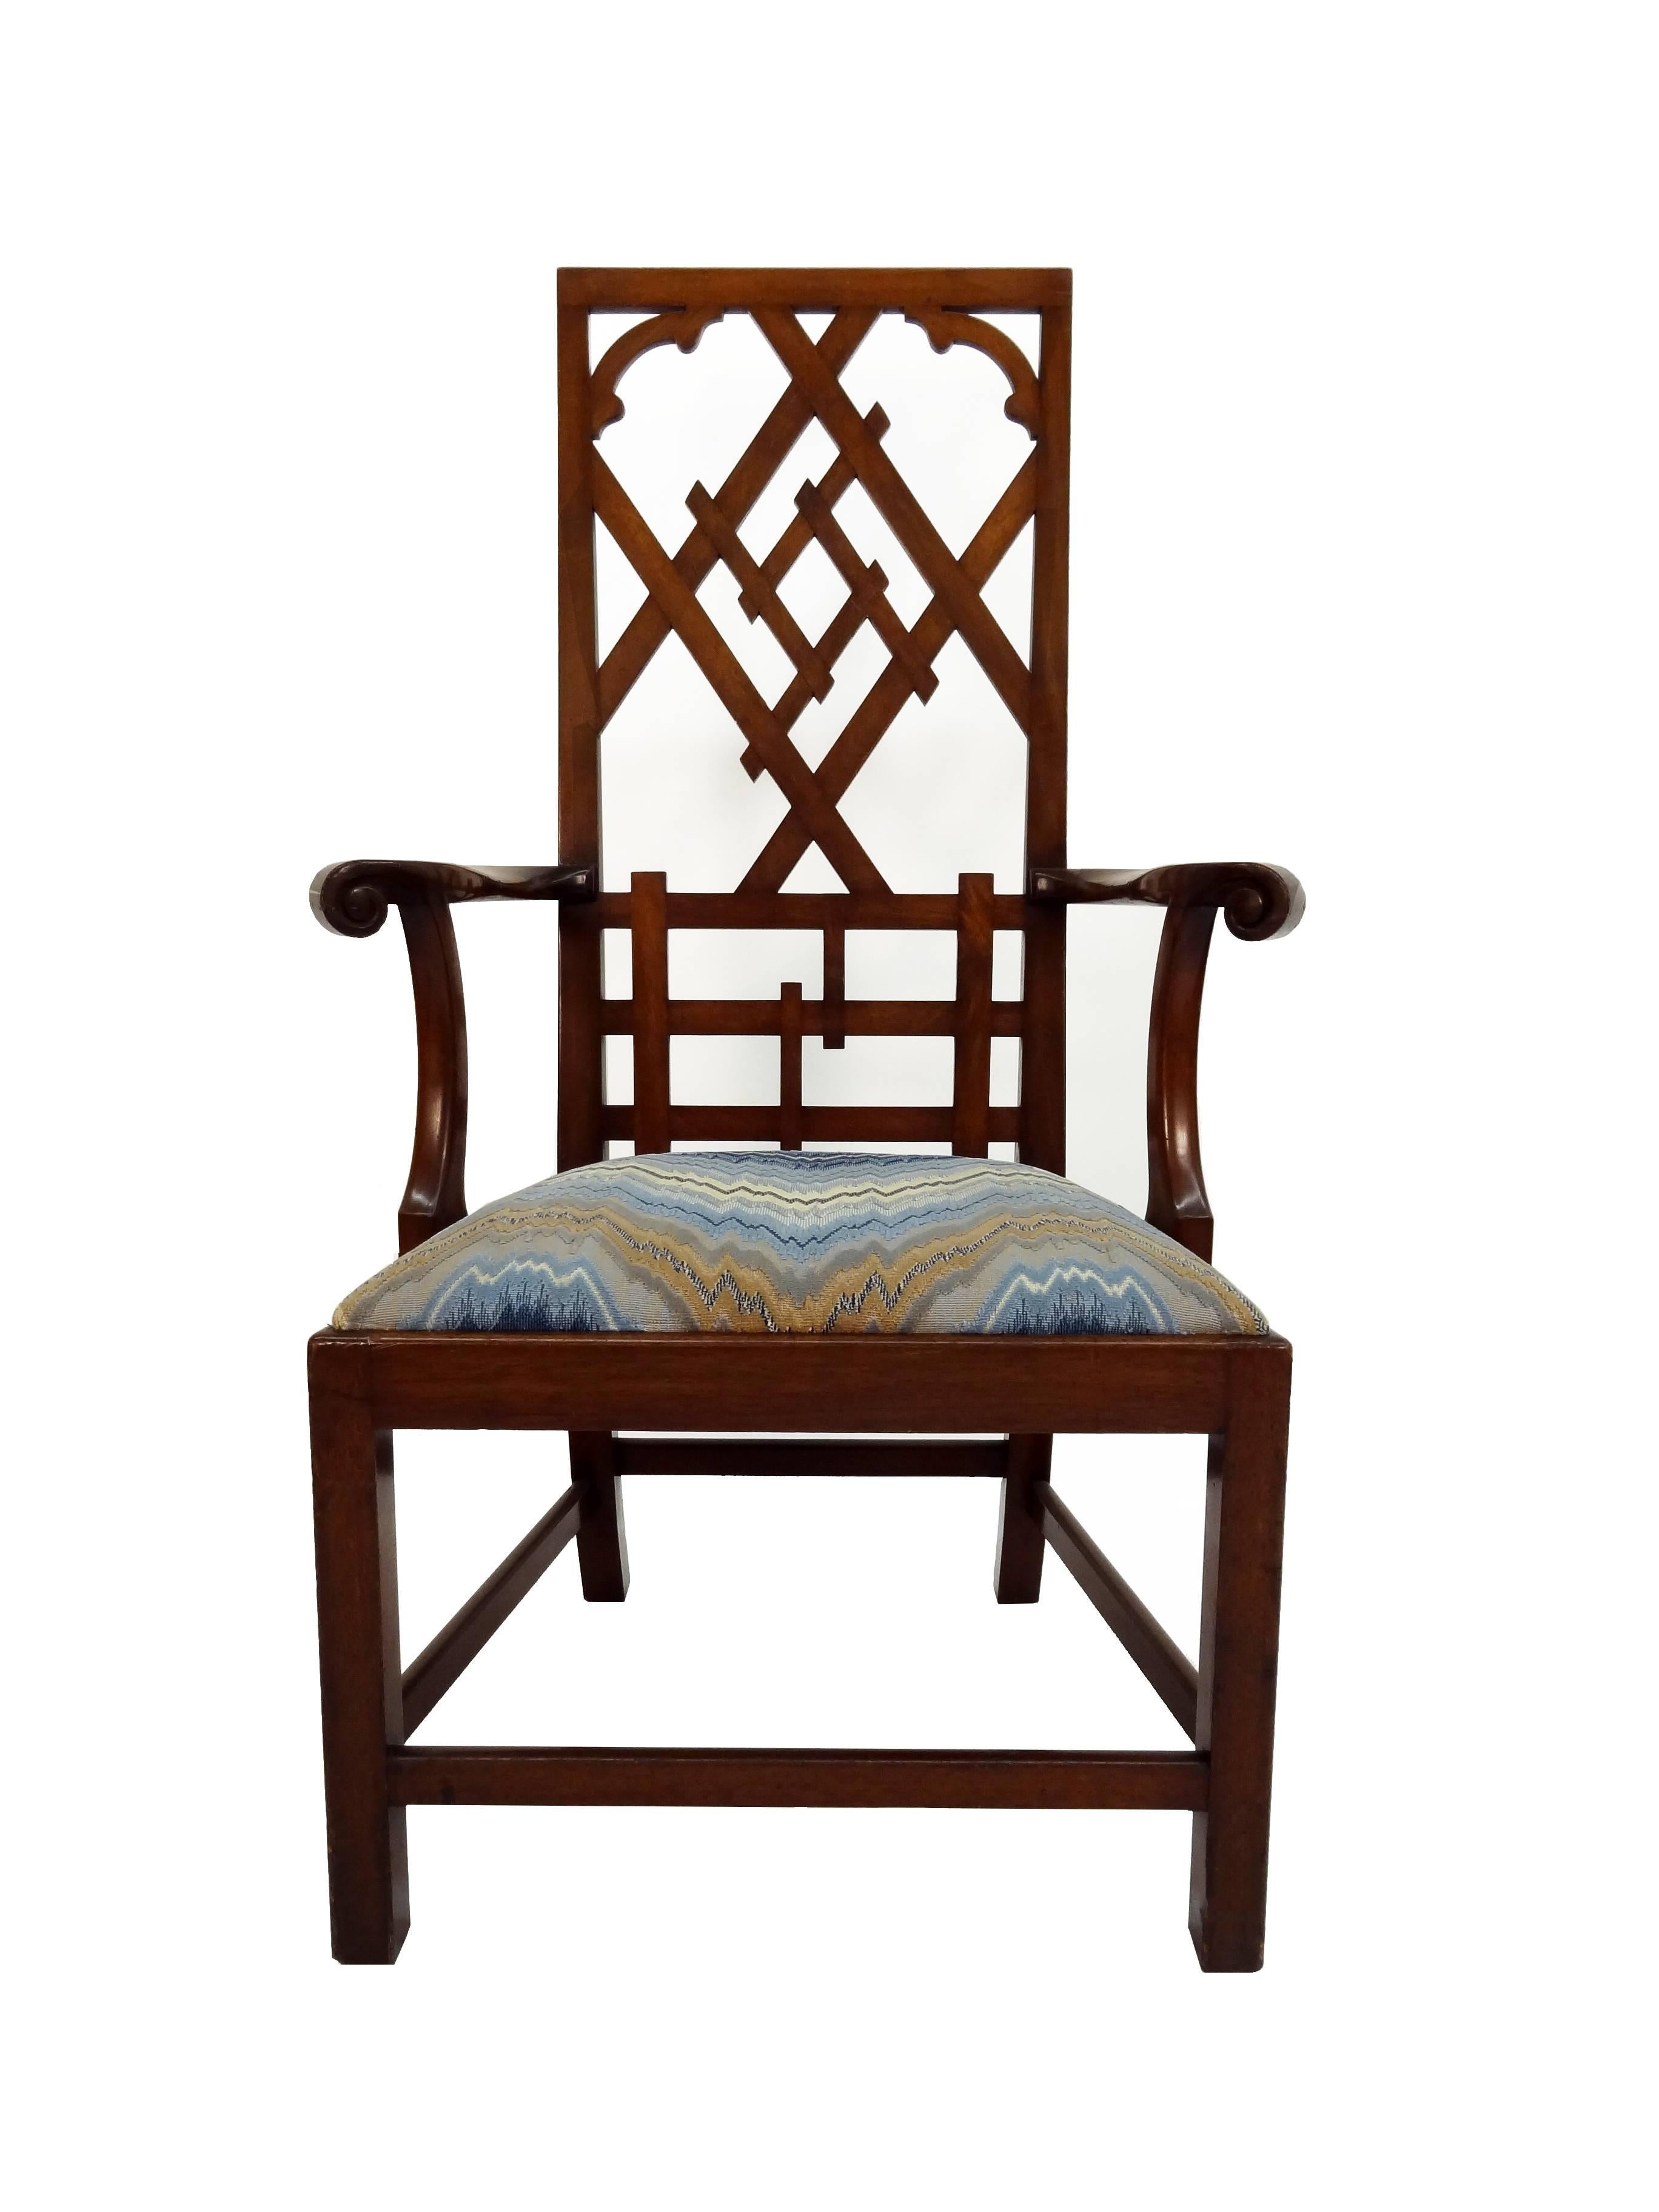 A Chippendale style open armchair with fret work high back and an upholstered drop-in seat. Seat upholstery can to customized. Total of four available. Please allow 4-6 weeks lead time.